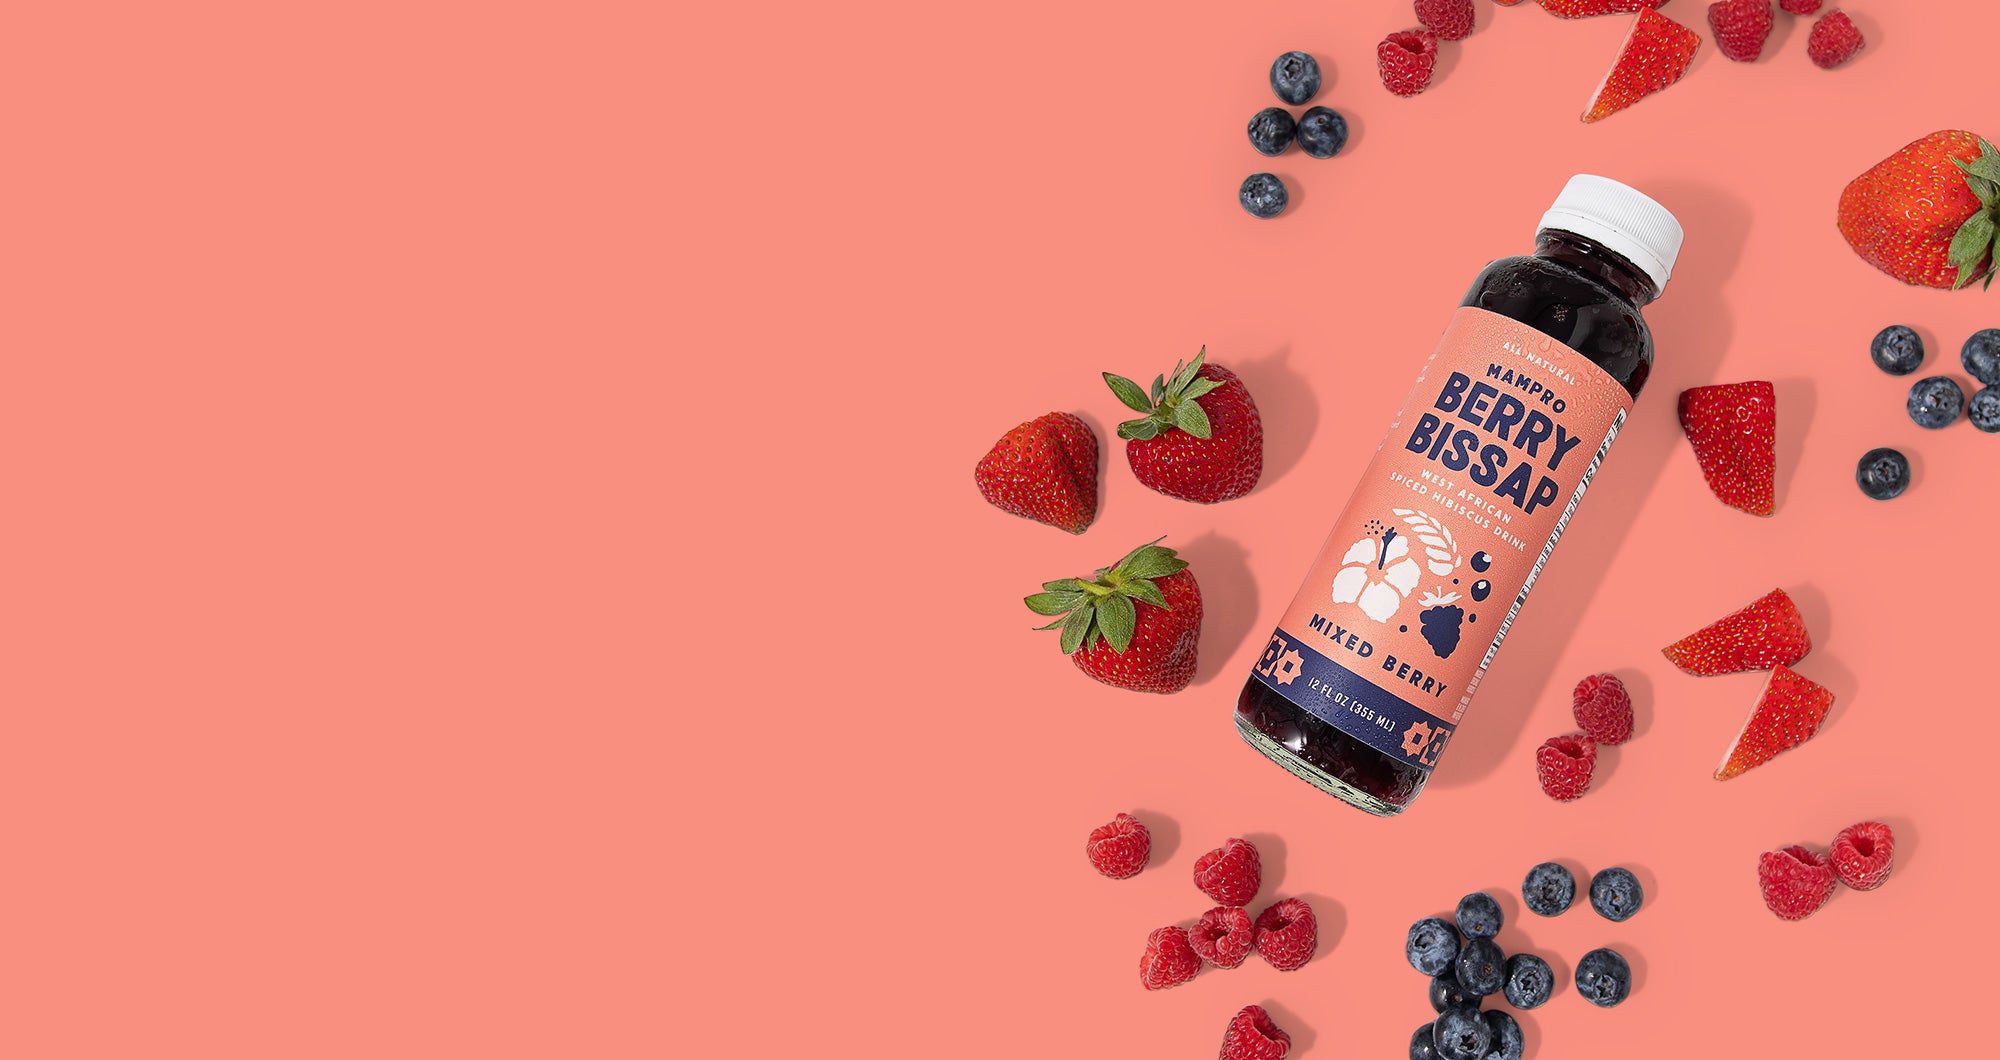 Bottle of Mixed Berry Berry Bissap on purple background with scattered strawberries, blueberries and raspberries.